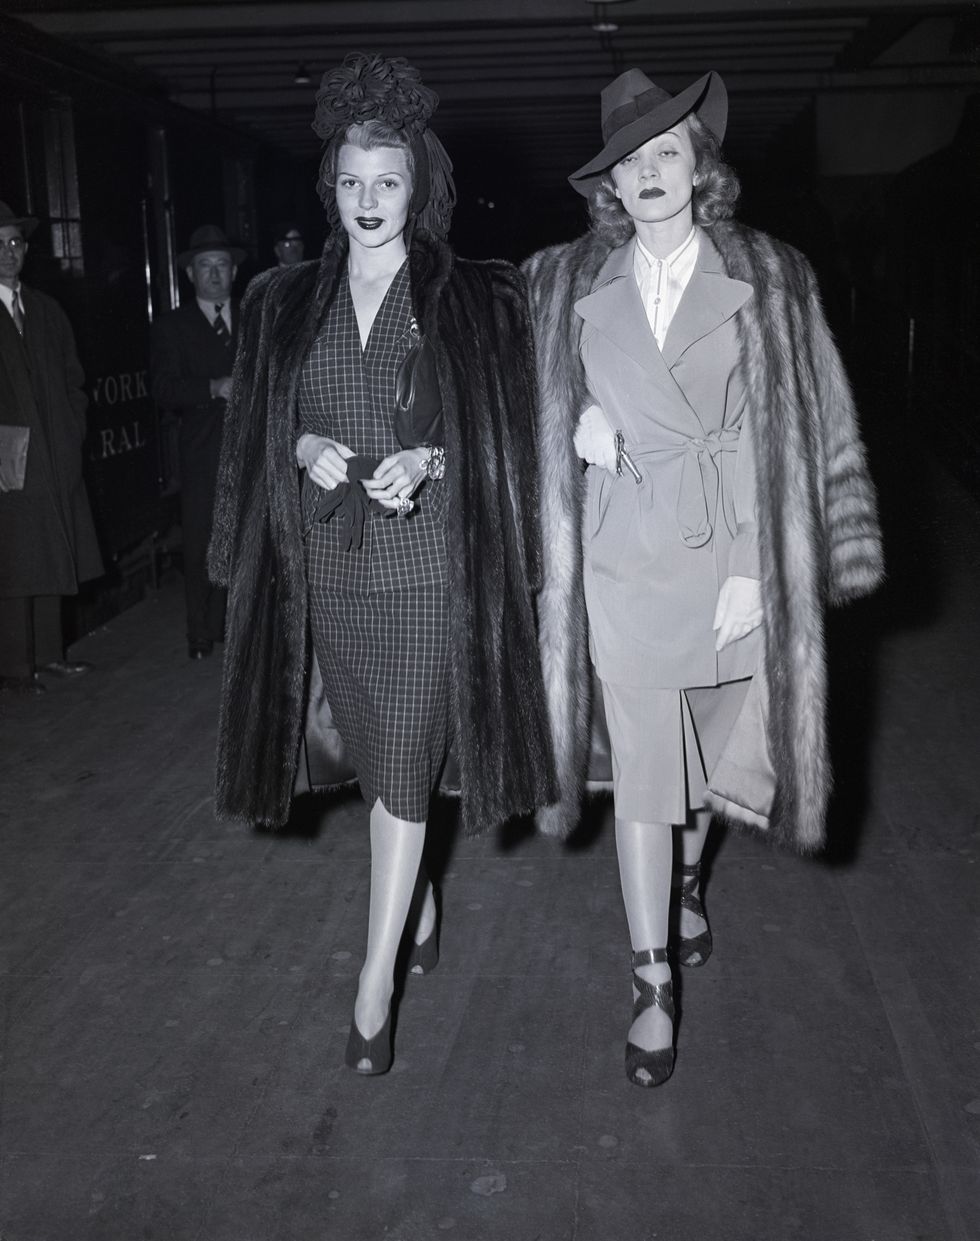 rita hayworth and marlene dietrich walk together, both wear fur jackets on their shoulders, hats, skirt suits and high heels